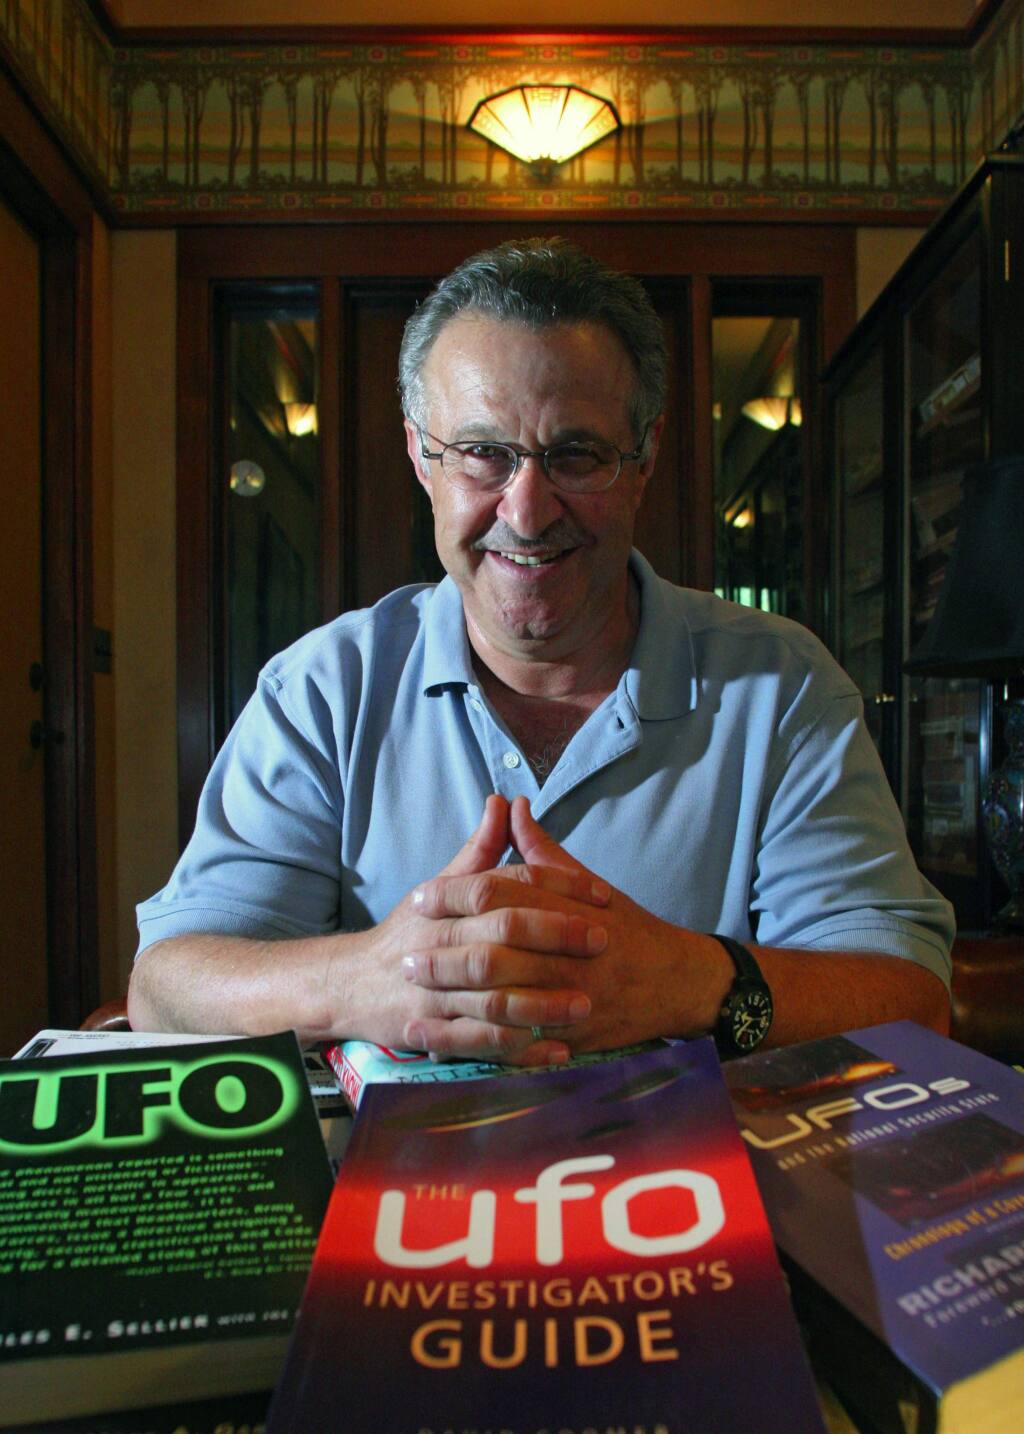 Jim Ledwith is better known in Sonoma as “UFO Jim,” and he’ll share his expertise at the Sonoma Community Center. (Robbi Pengelly/Index-Tribune file)